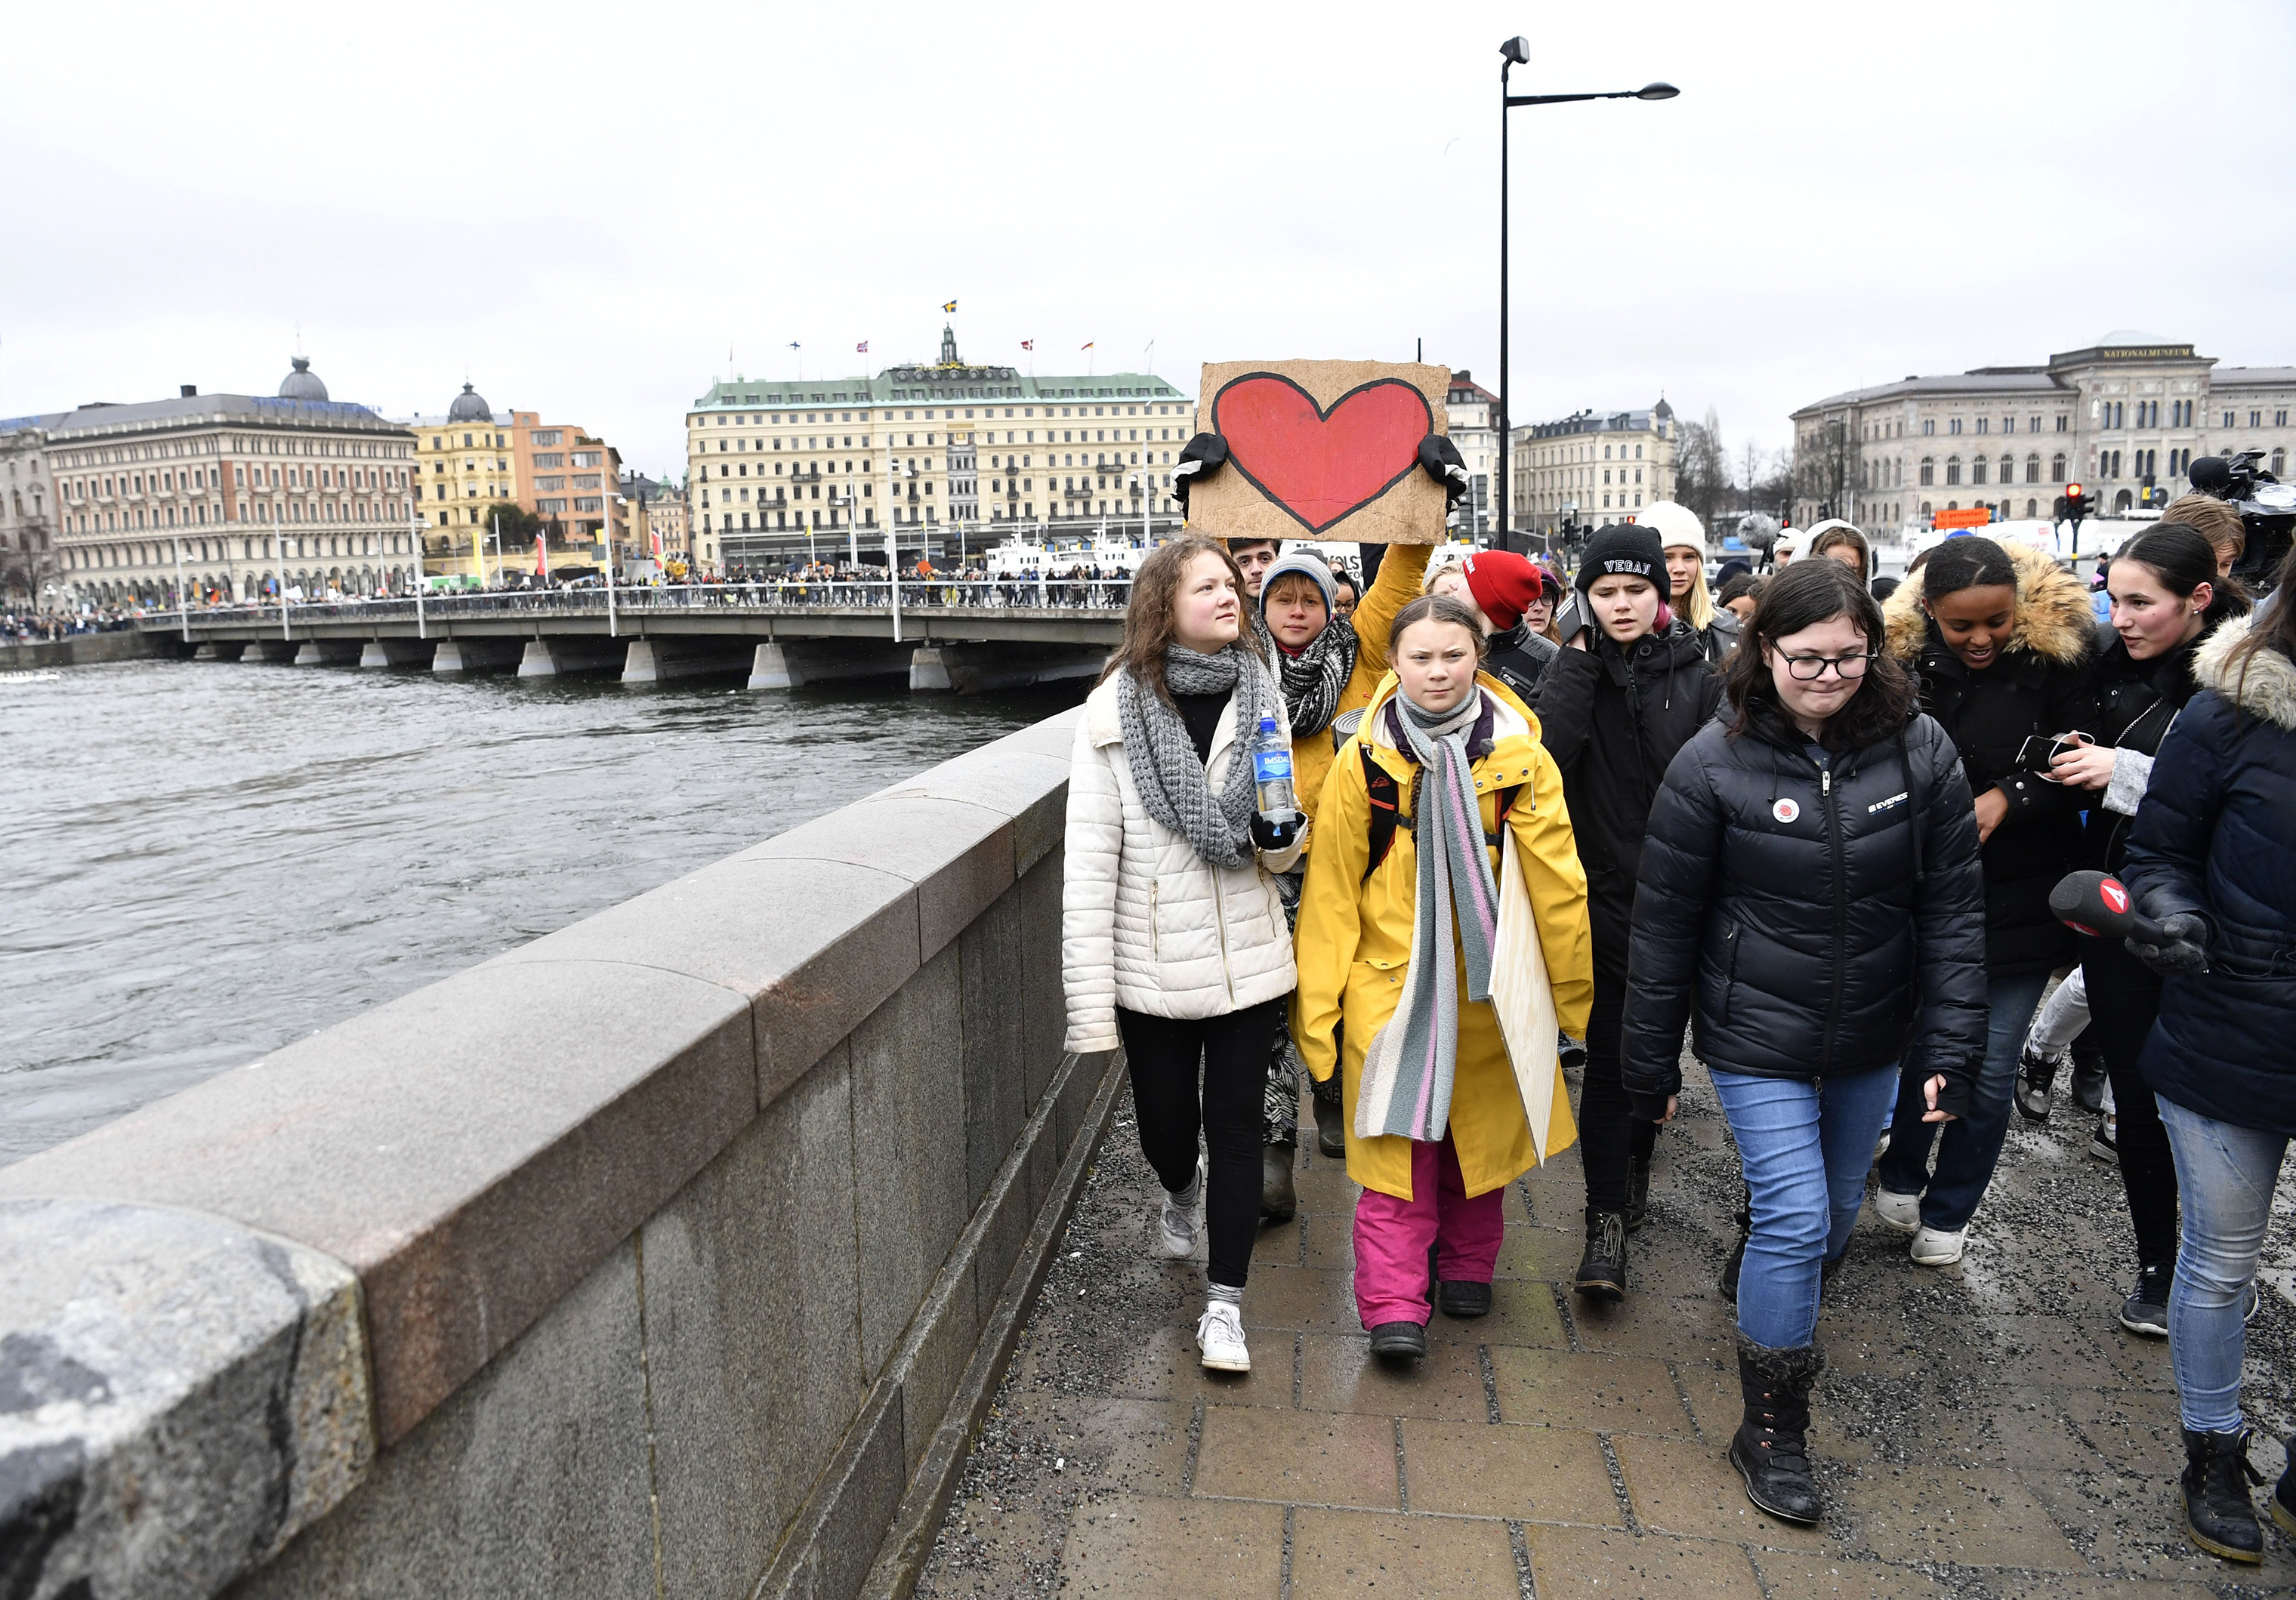 Activist Greta Thunberg, foreground centre, and her sister Beata Thunberg, left, participate in a climate protest, in central Stockholm, Sweden, on March 15, 2019. (Henrik Montgomery—AP)